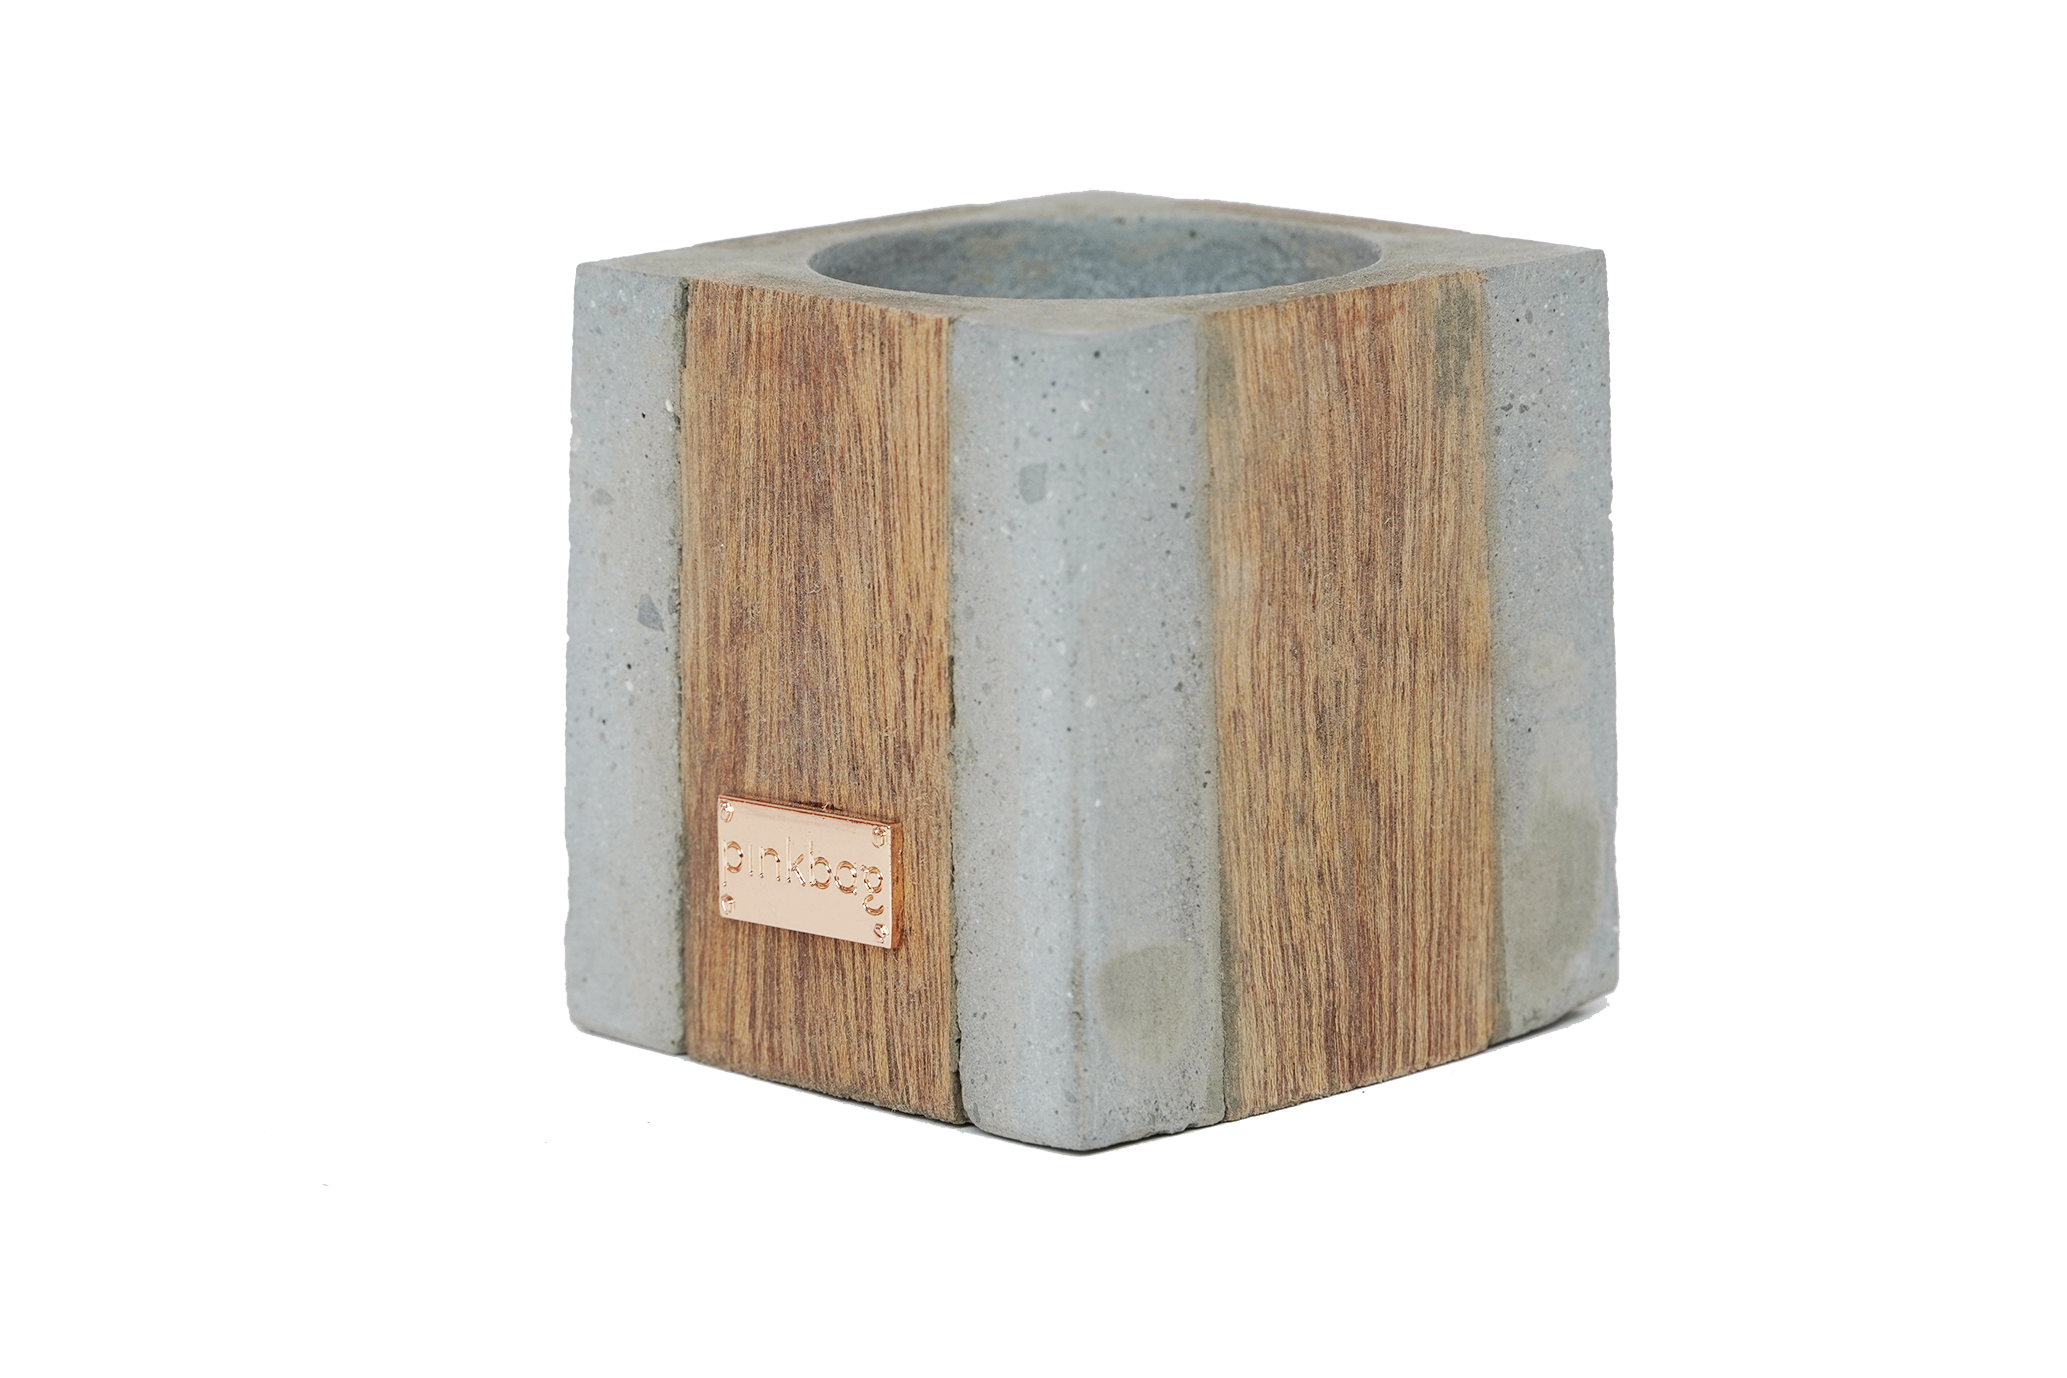 4D wood|concrete GIFT | pink